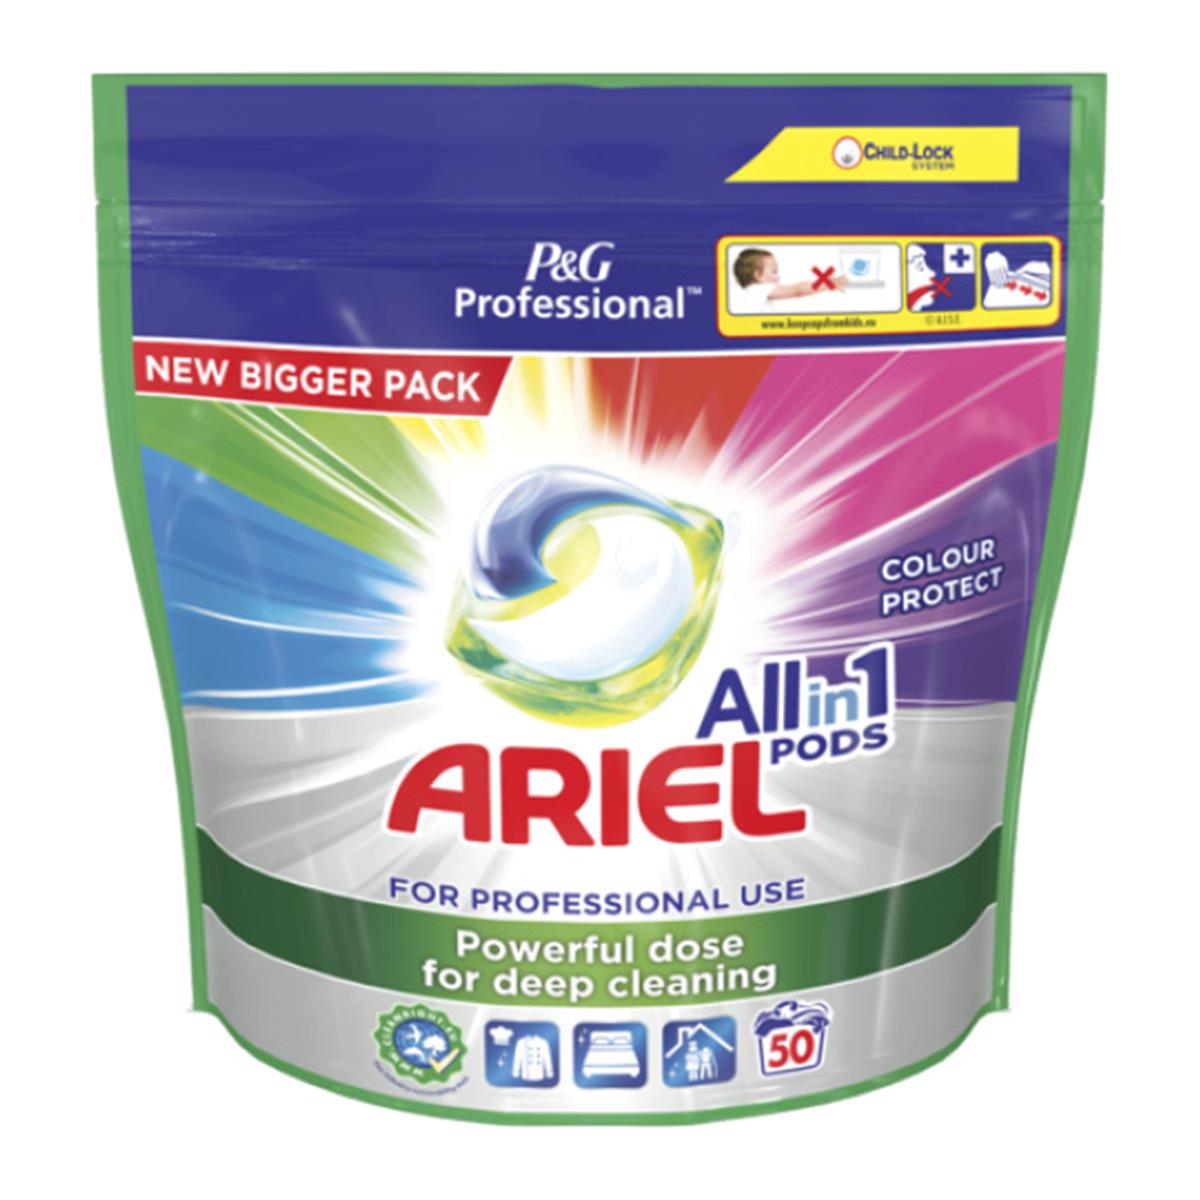 Ariel Professional Liquipods All in One Colour Protect - 50 Pods